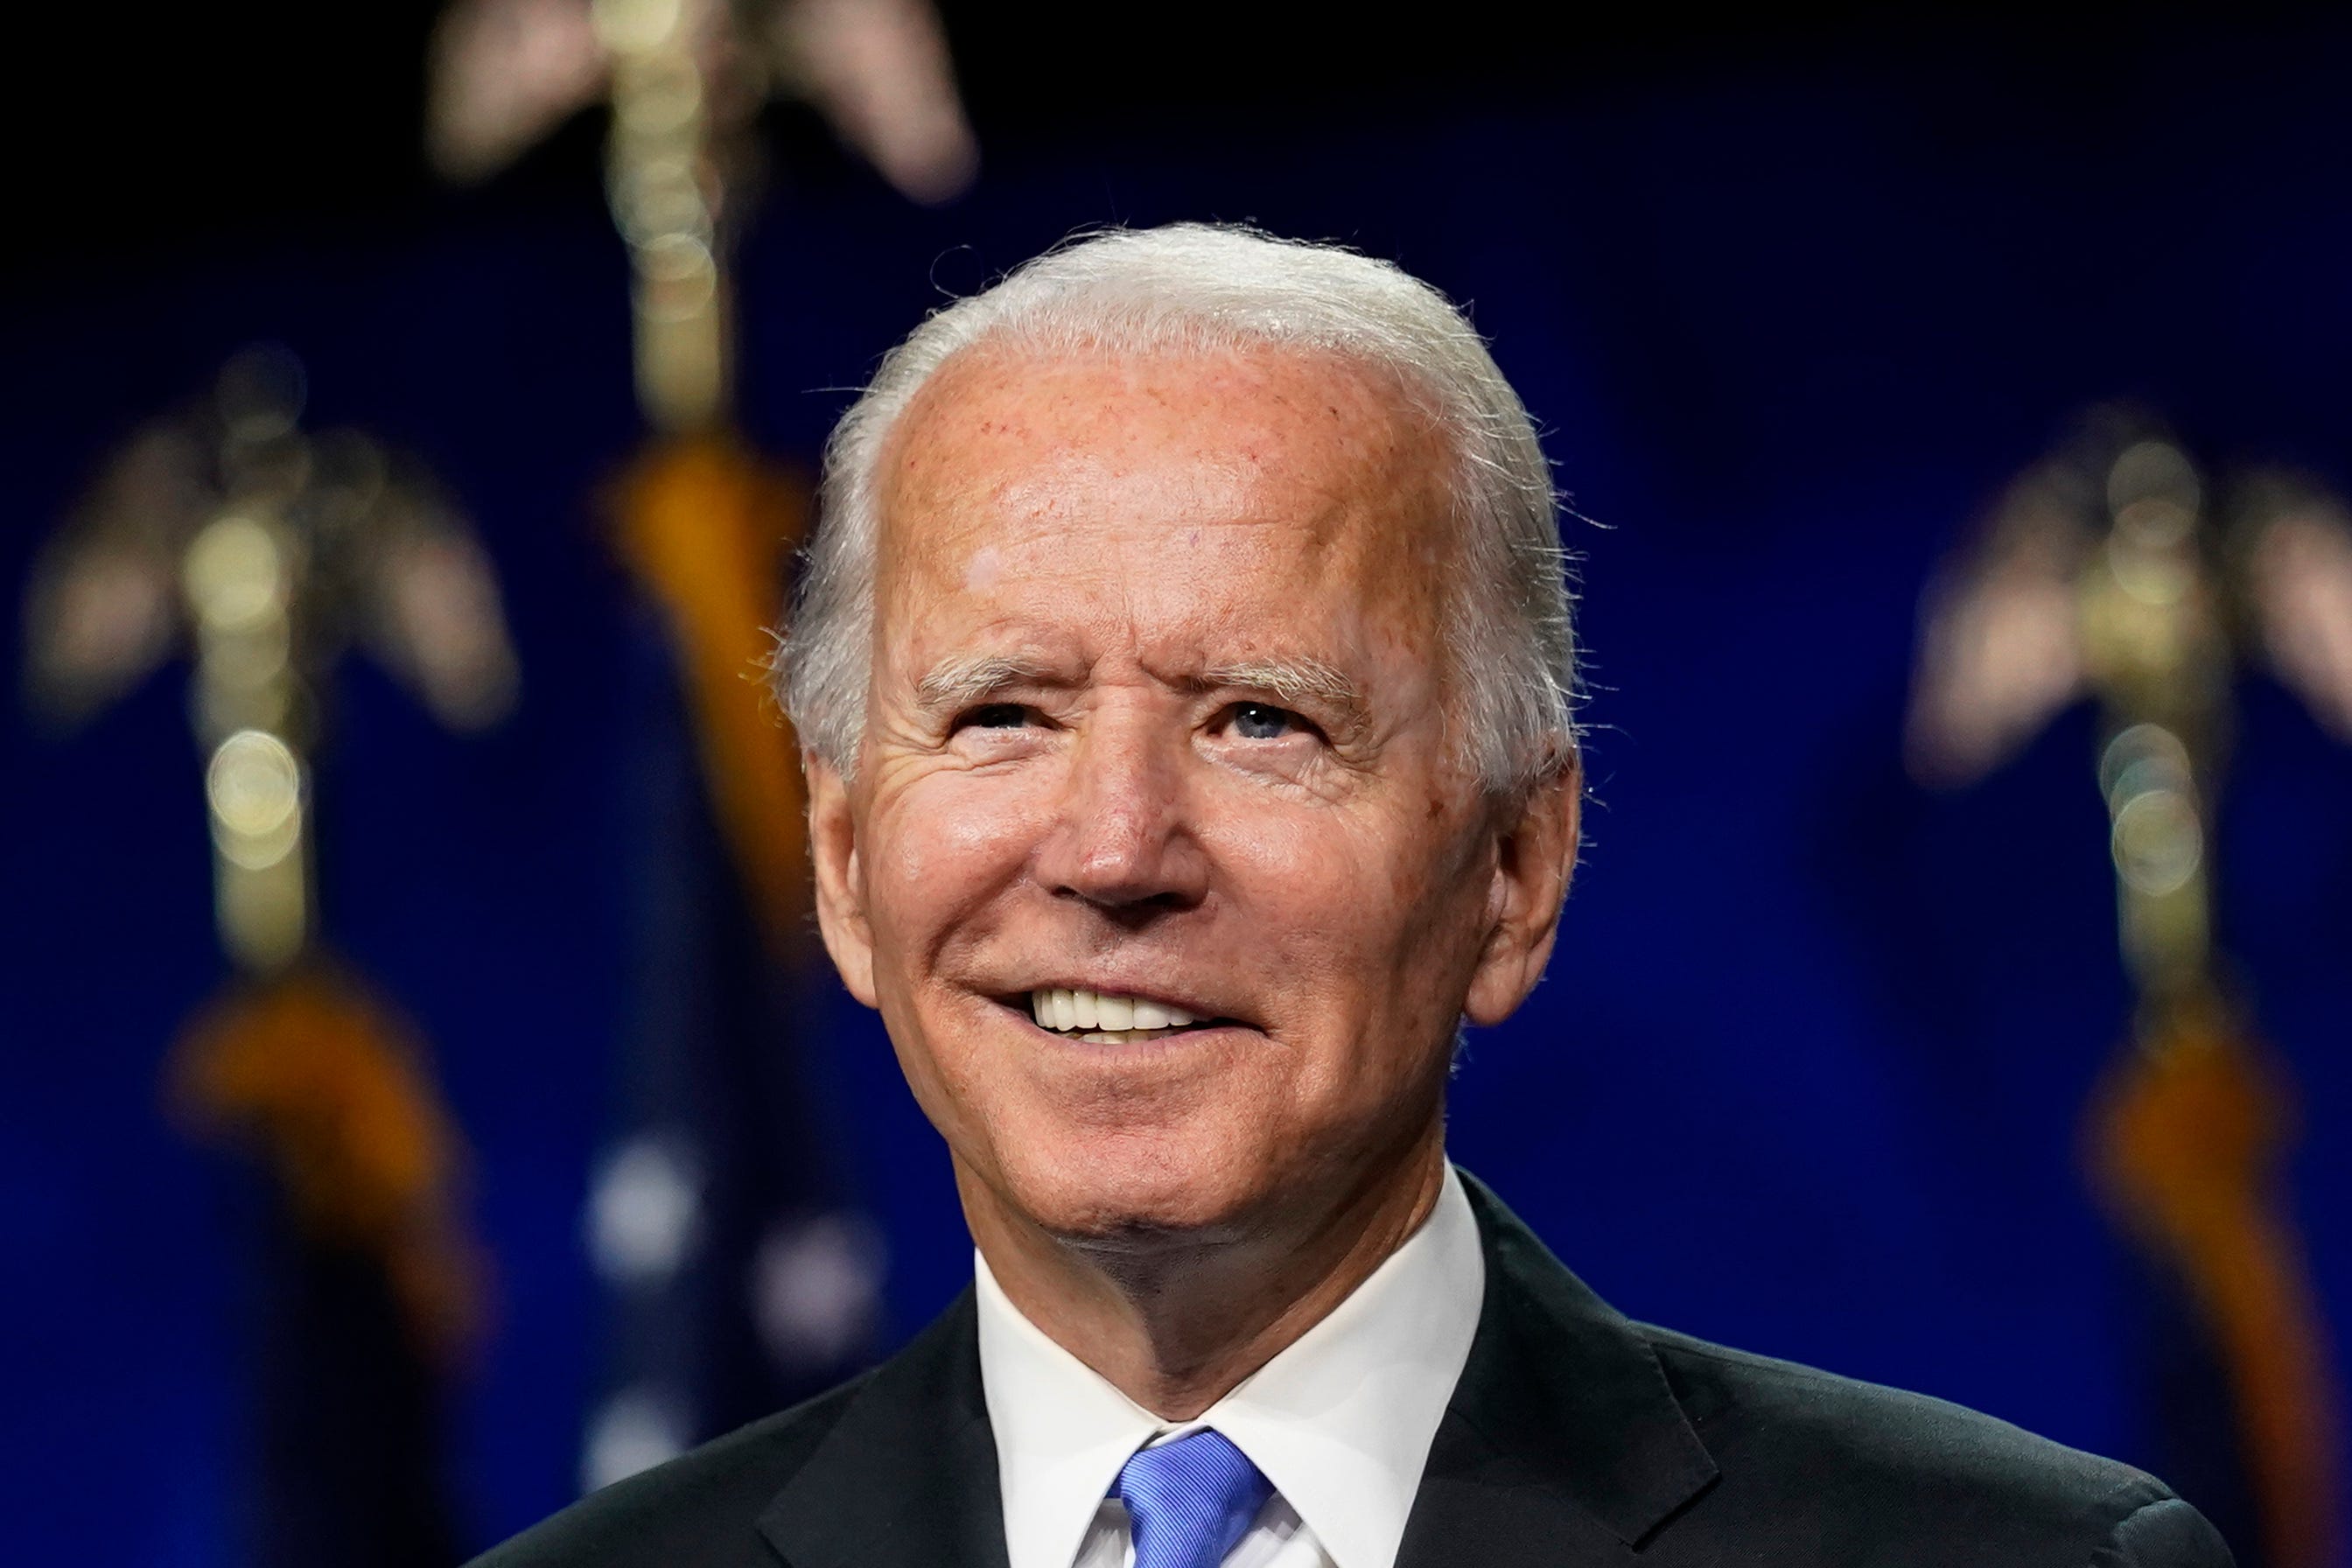 joe biden is no different than trump - Biden|President|Joe|States|Delaware|Obama|Vice|Senate|Campaign|Election|Time|Administration|House|Law|People|Years|Family|Year|Trump|School|University|Senator|Office|Party|Country|Committee|Act|War|Days|Climate|Hunter|Health|America|State|Day|Democrats|Americans|Documents|Care|Plan|United States|Vice President|White House|Joe Biden|Biden Administration|Democratic Party|Law School|Presidential Election|President Joe Biden|Executive Orders|Foreign Relations Committee|Presidential Campaign|Second Term|47Th Vice President|Syracuse University|Climate Change|Hillary Clinton|Last Year|Barack Obama|Joseph Robinette Biden|U.S. Senator|Health Care|U.S. Senate|Donald Trump|President Trump|President Biden|Federal Register|Judiciary Committee|Presidential Nomination|Presidential Medal